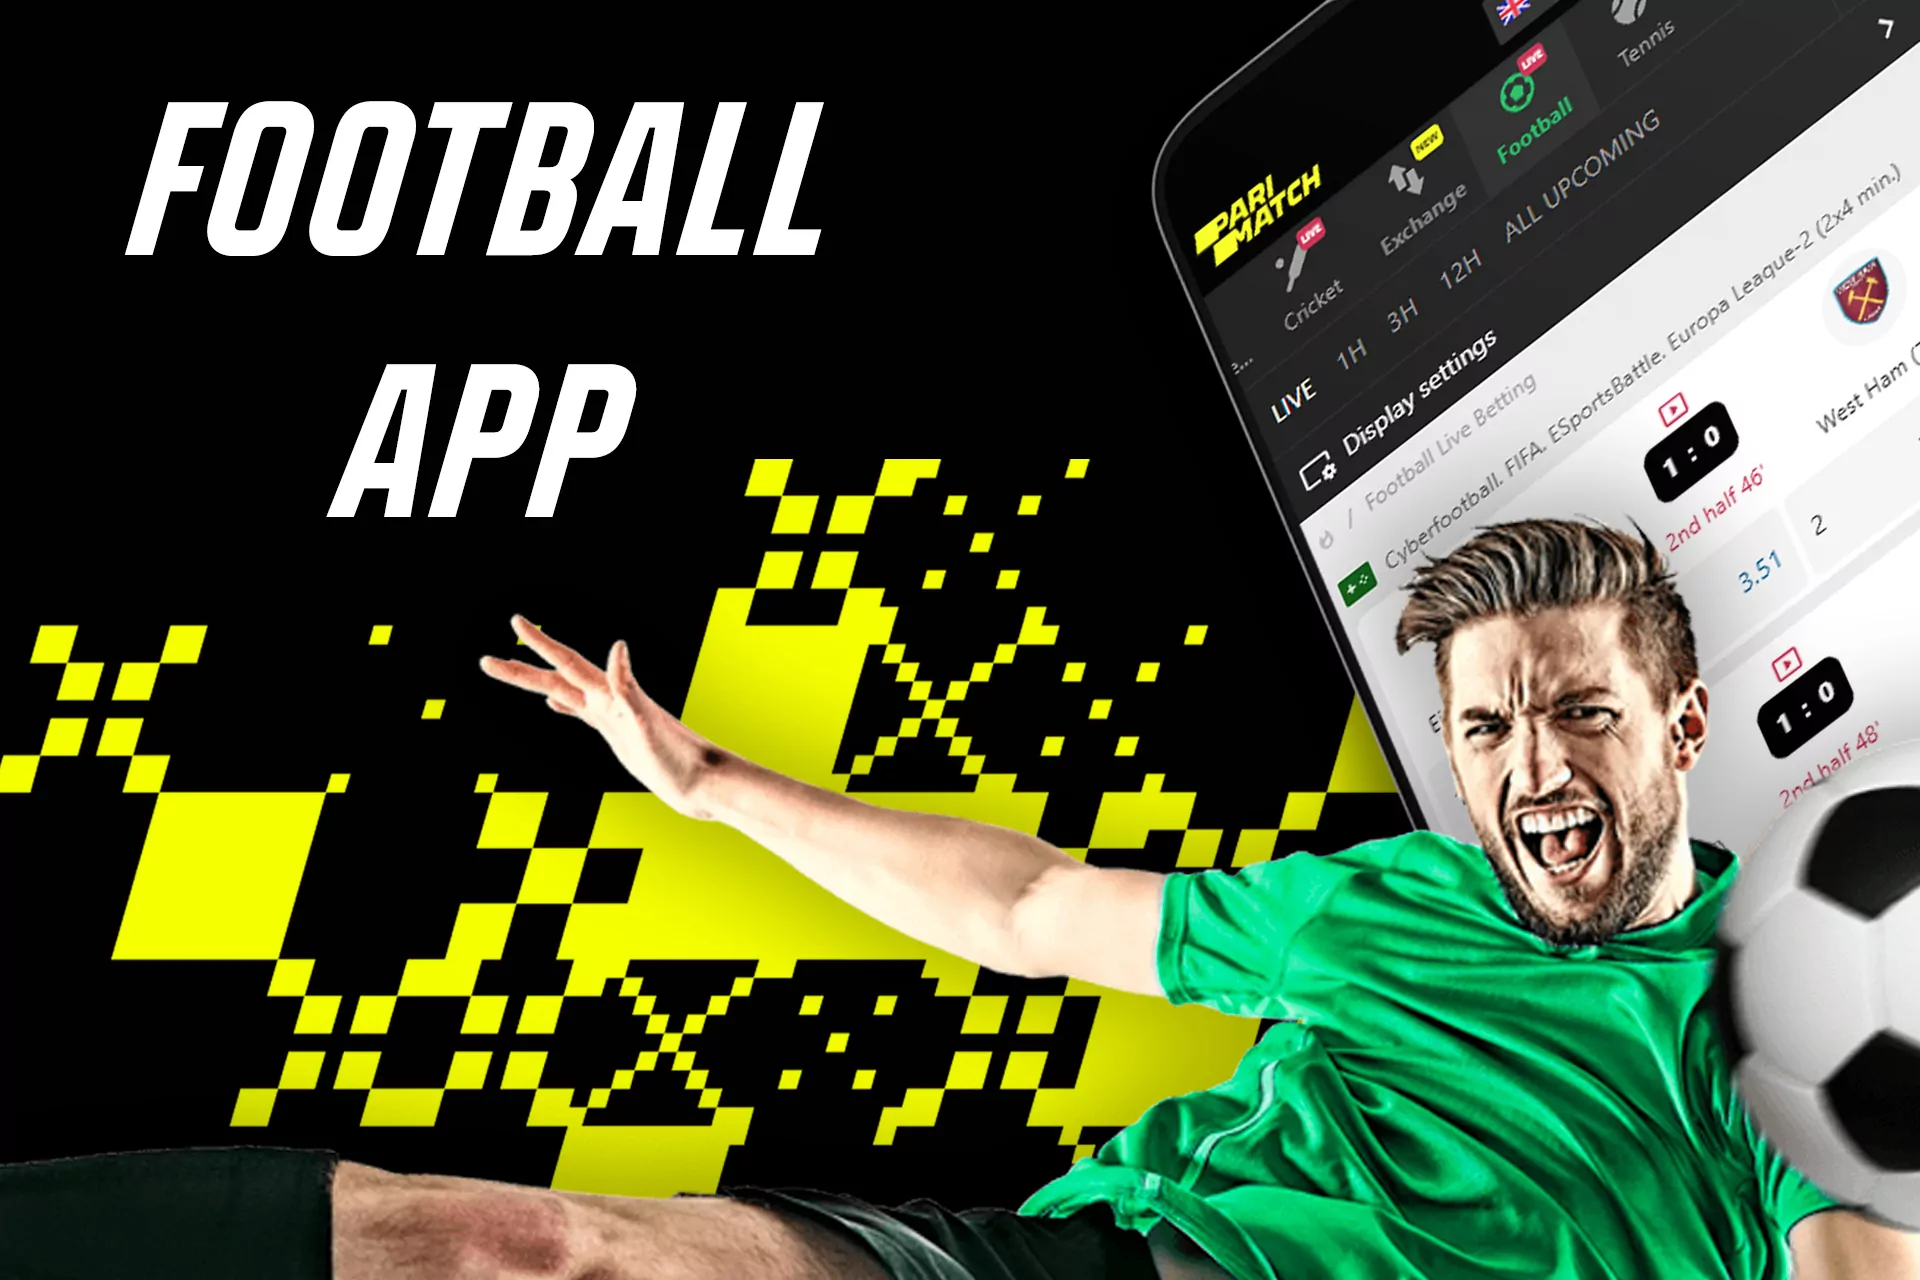 In the Parimatch app, you can also place bets on football events.